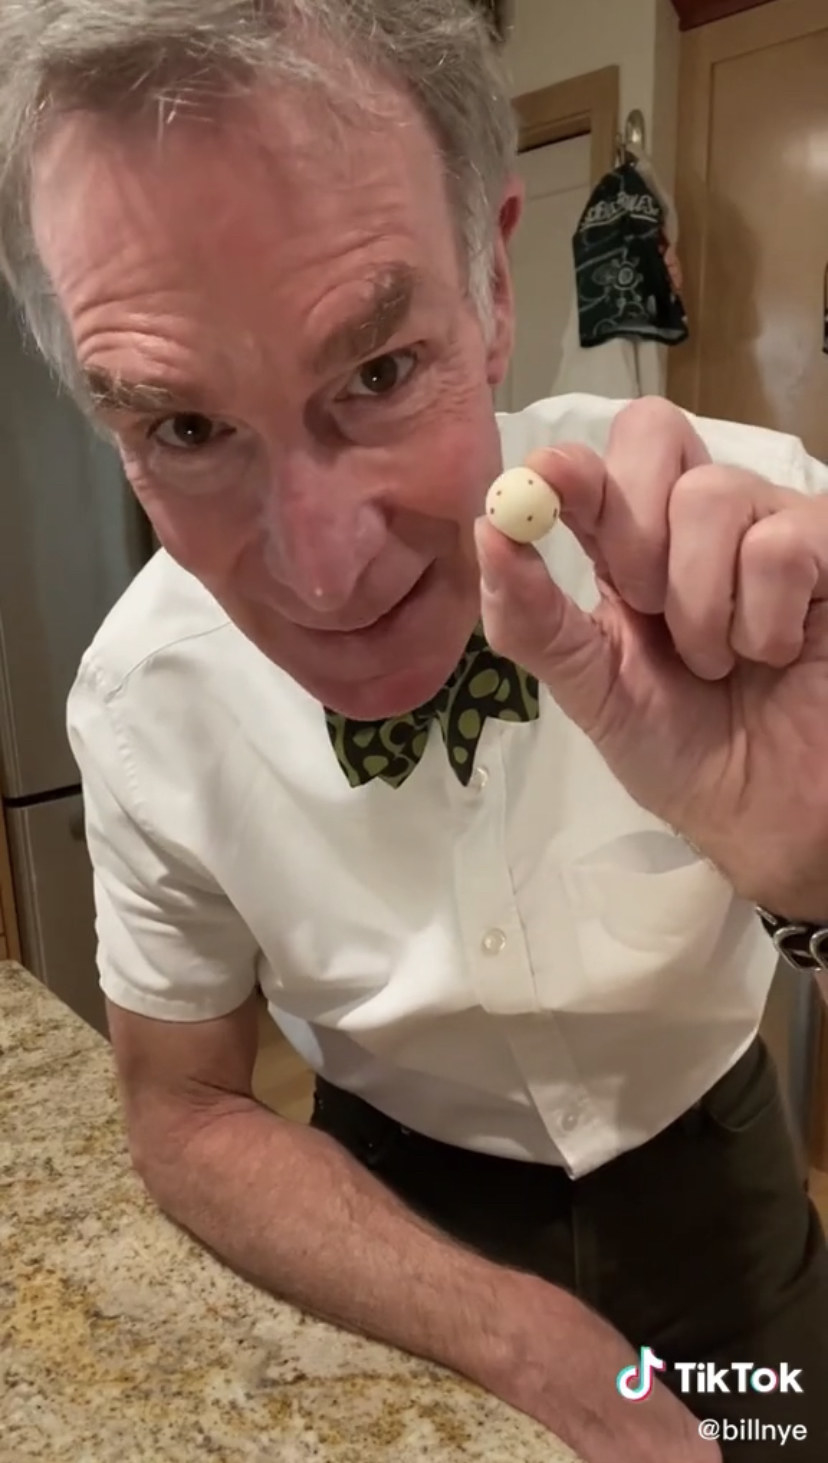 Bill Nye holding up a clay ball meant to represent a spit droplet